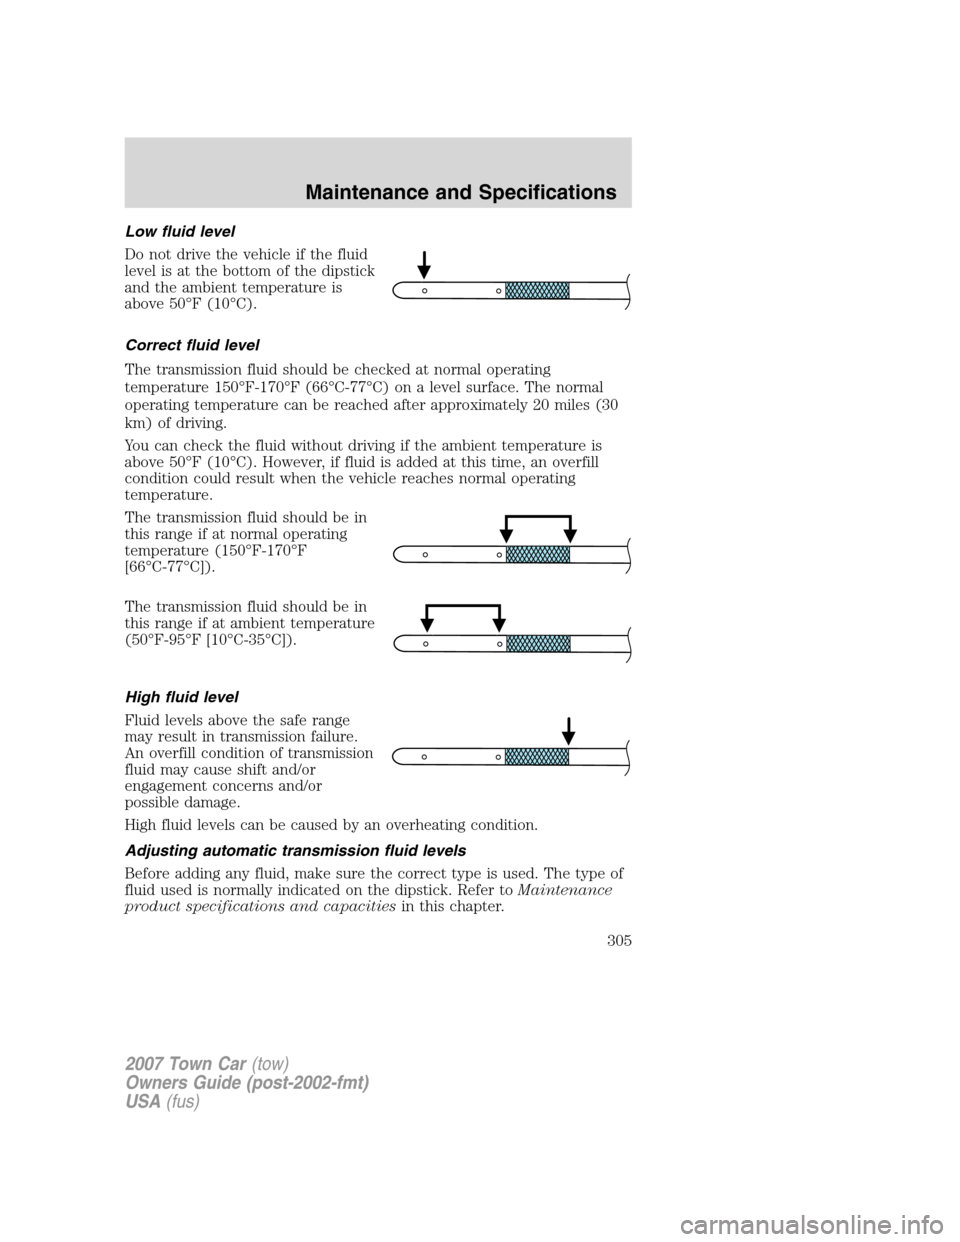 LINCOLN TOWN CAR 2007  Owners Manual Low fluid level
Do not drive the vehicle if the fluid
level is at the bottom of the dipstick
and the ambient temperature is
above 50°F (10°C).
Correct fluid level
The transmission fluid should be ch